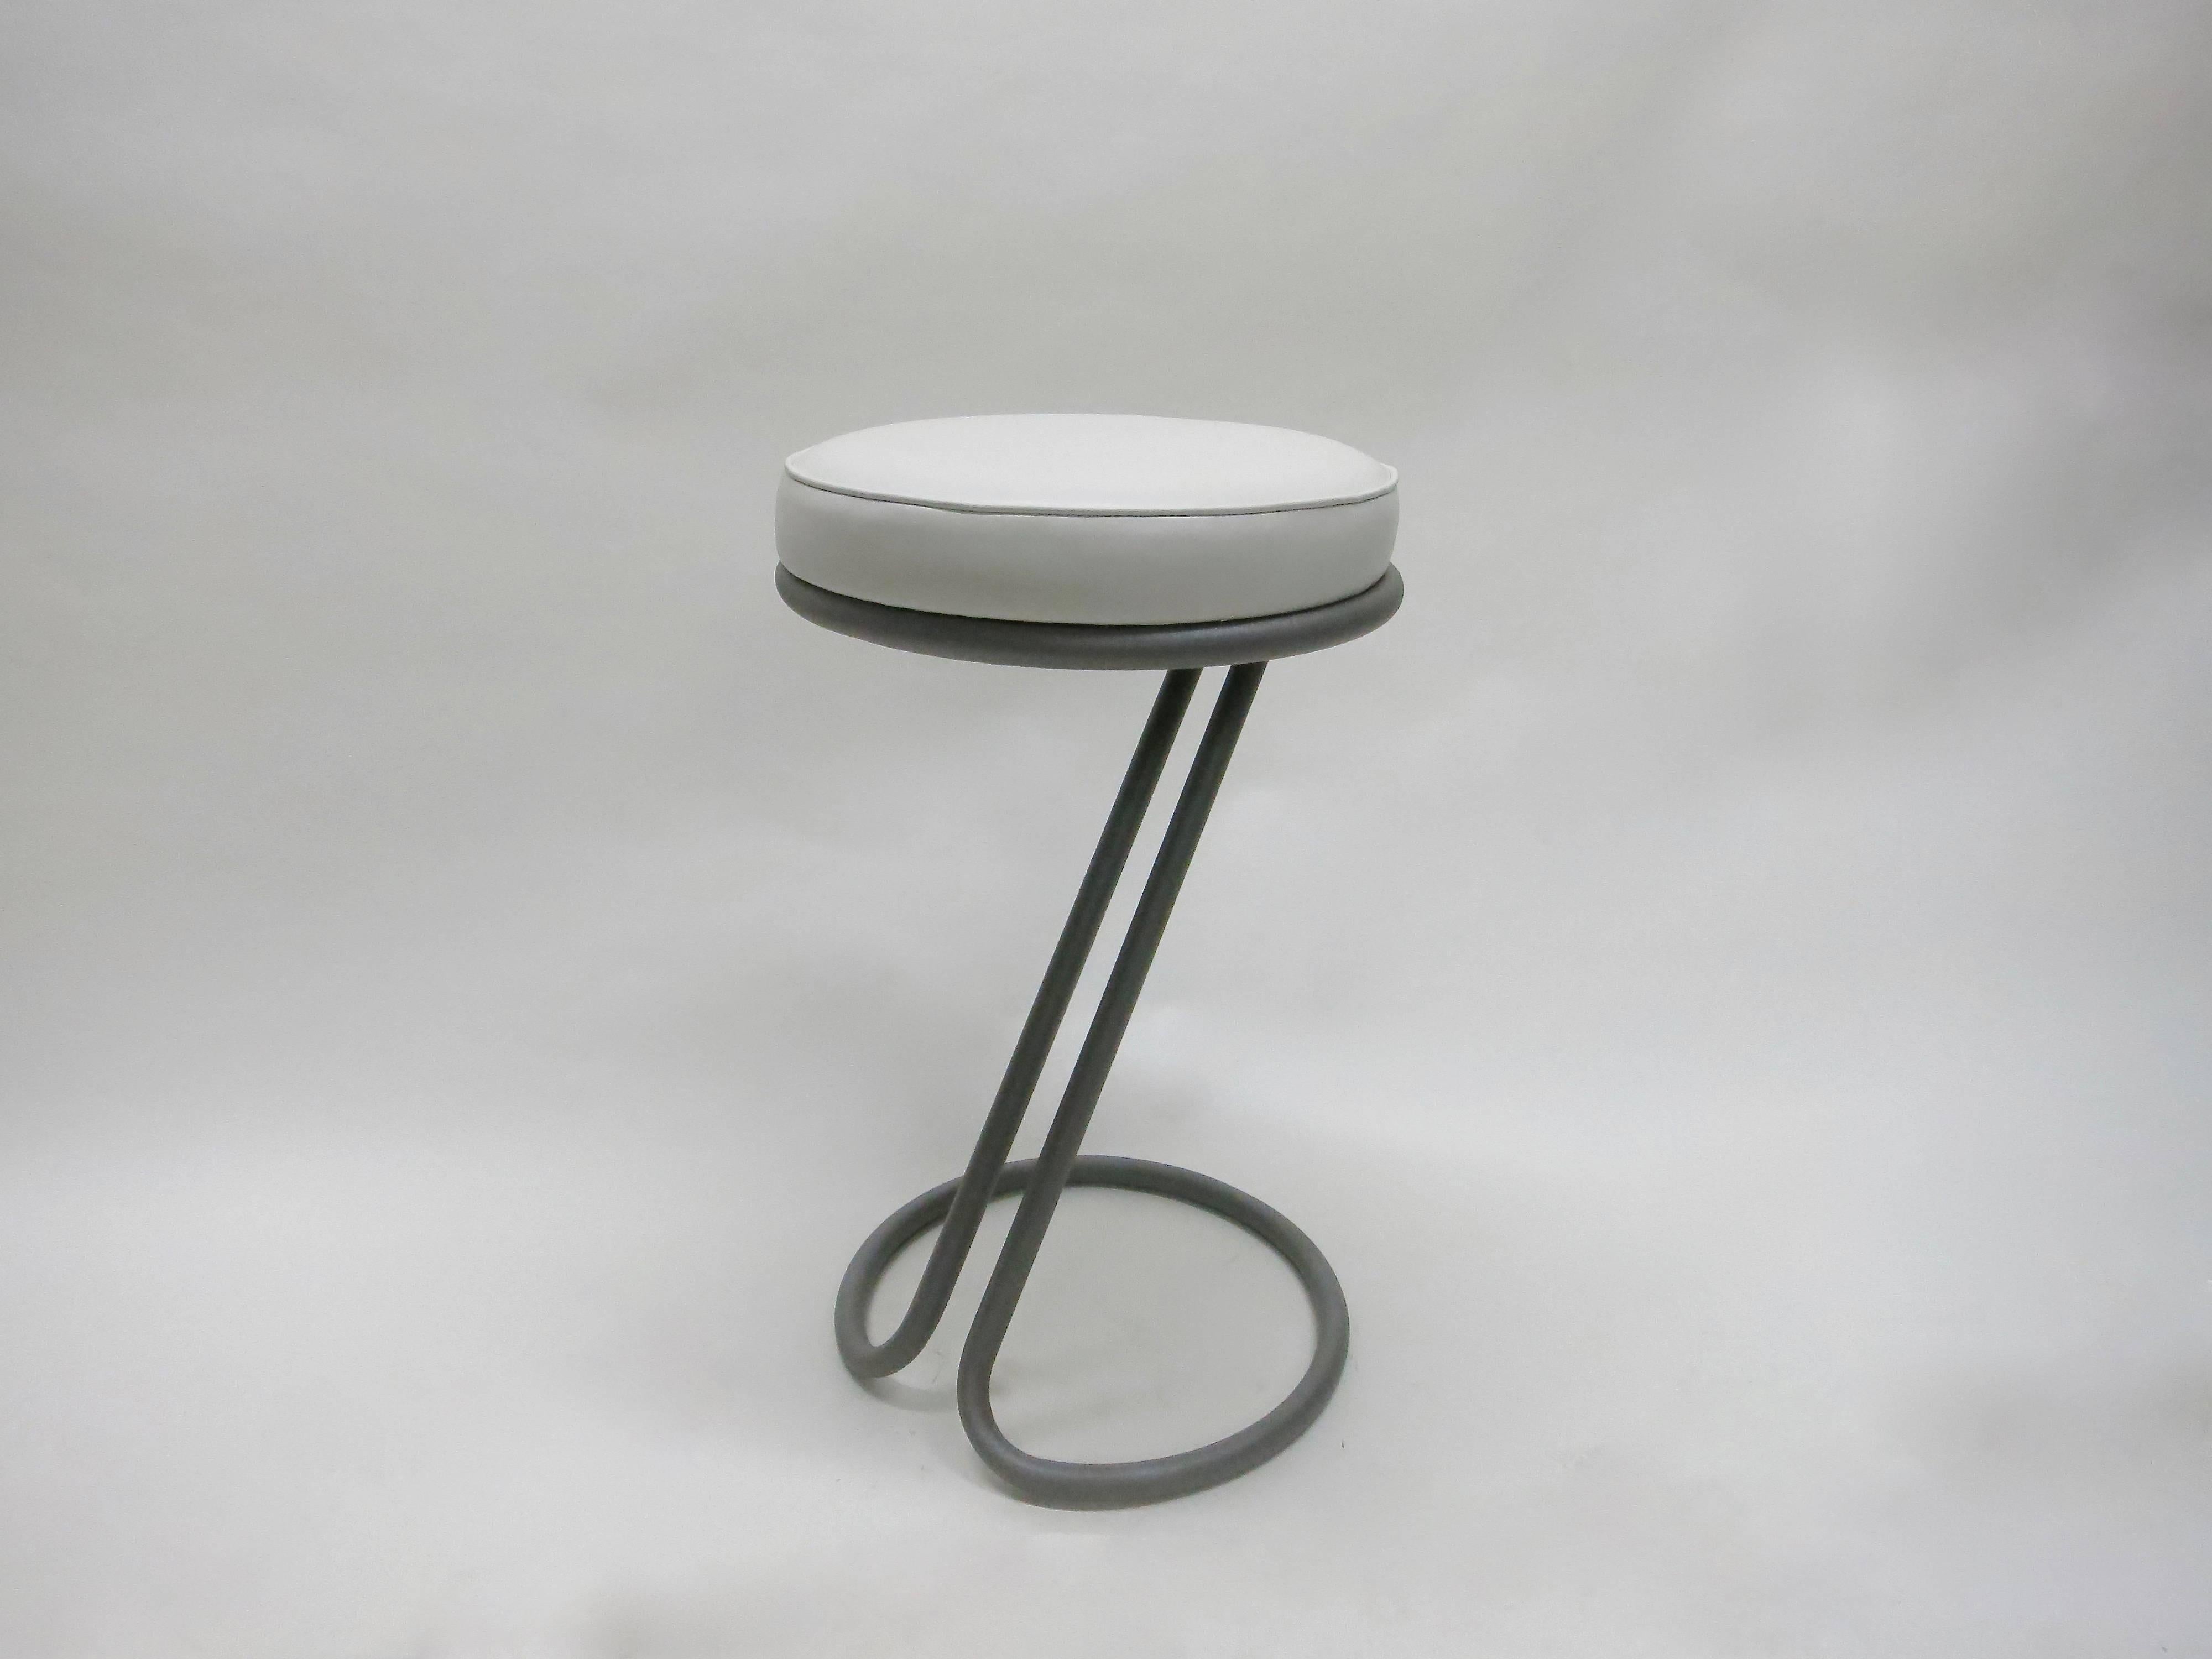 Set of Six Z stools by Gilbert Rhode are all original.  The bases have been sand blasted and powder coated with a metallic coat of paint. The seats are covered in white leather with a welting on edge. 